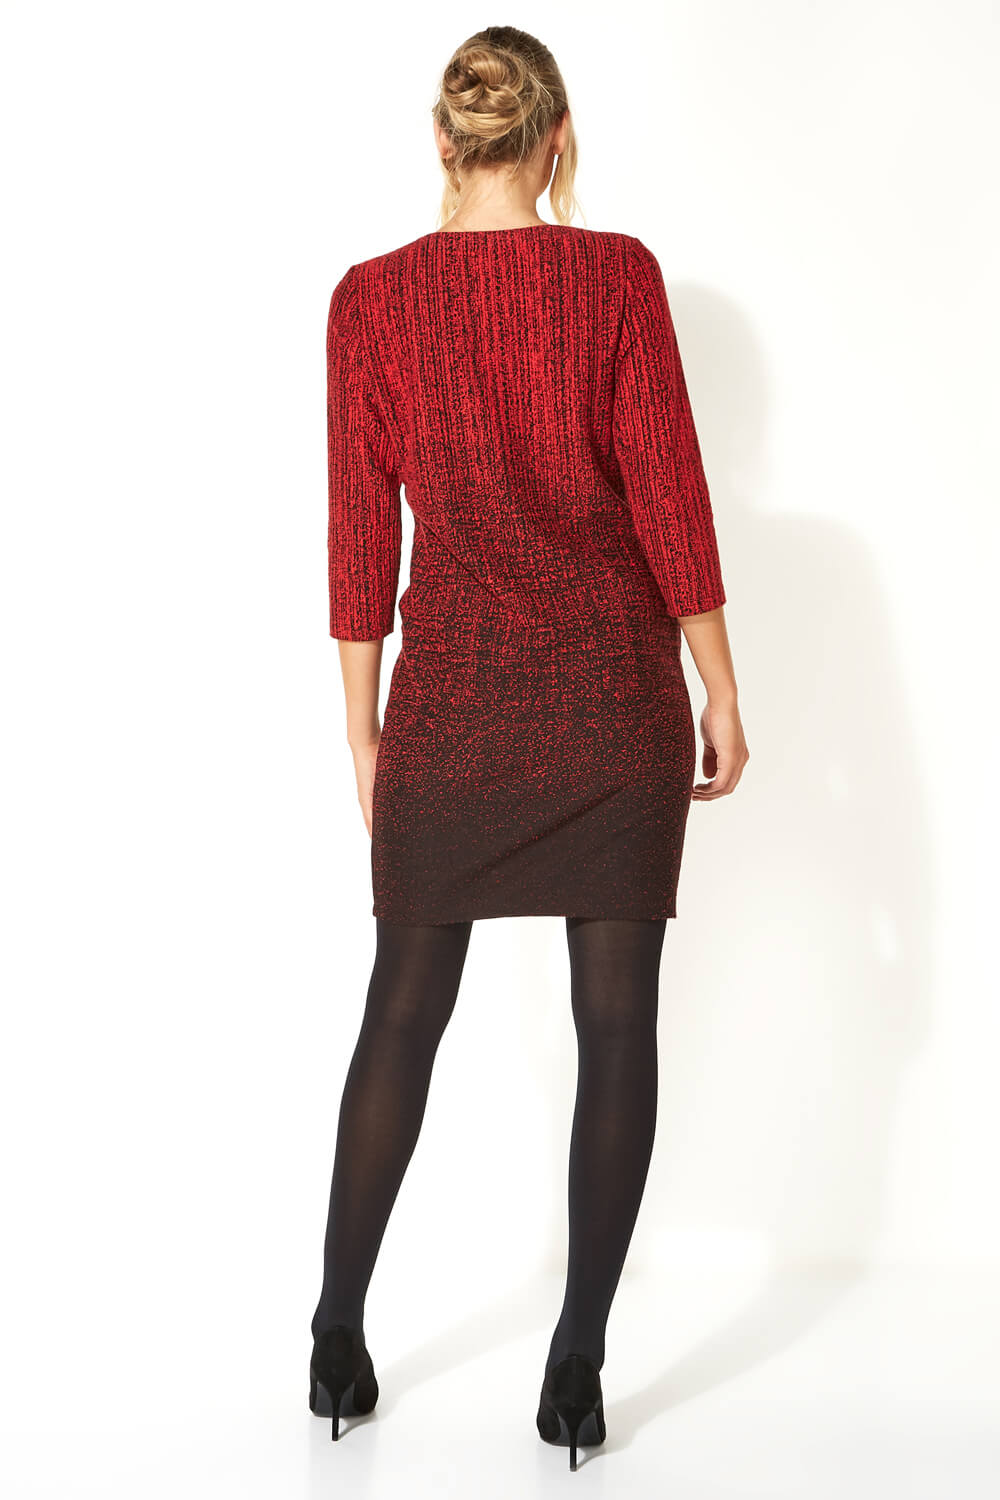 Red Ombre Textured Shift Dress, Image 5 of 5